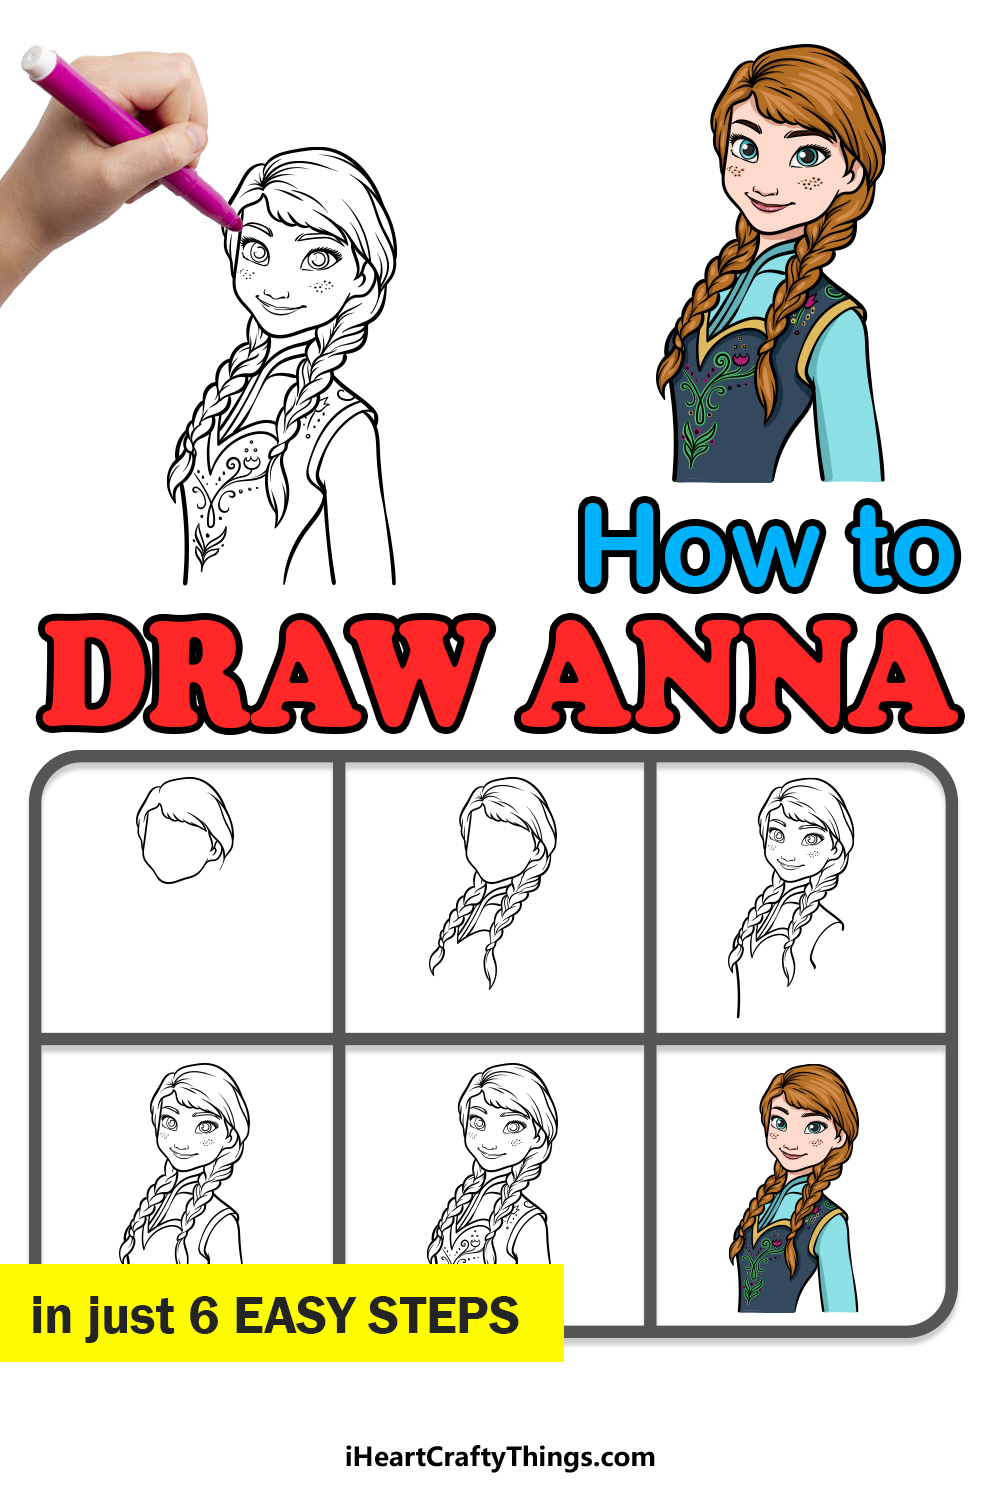 how to draw Anna in 6 easy steps